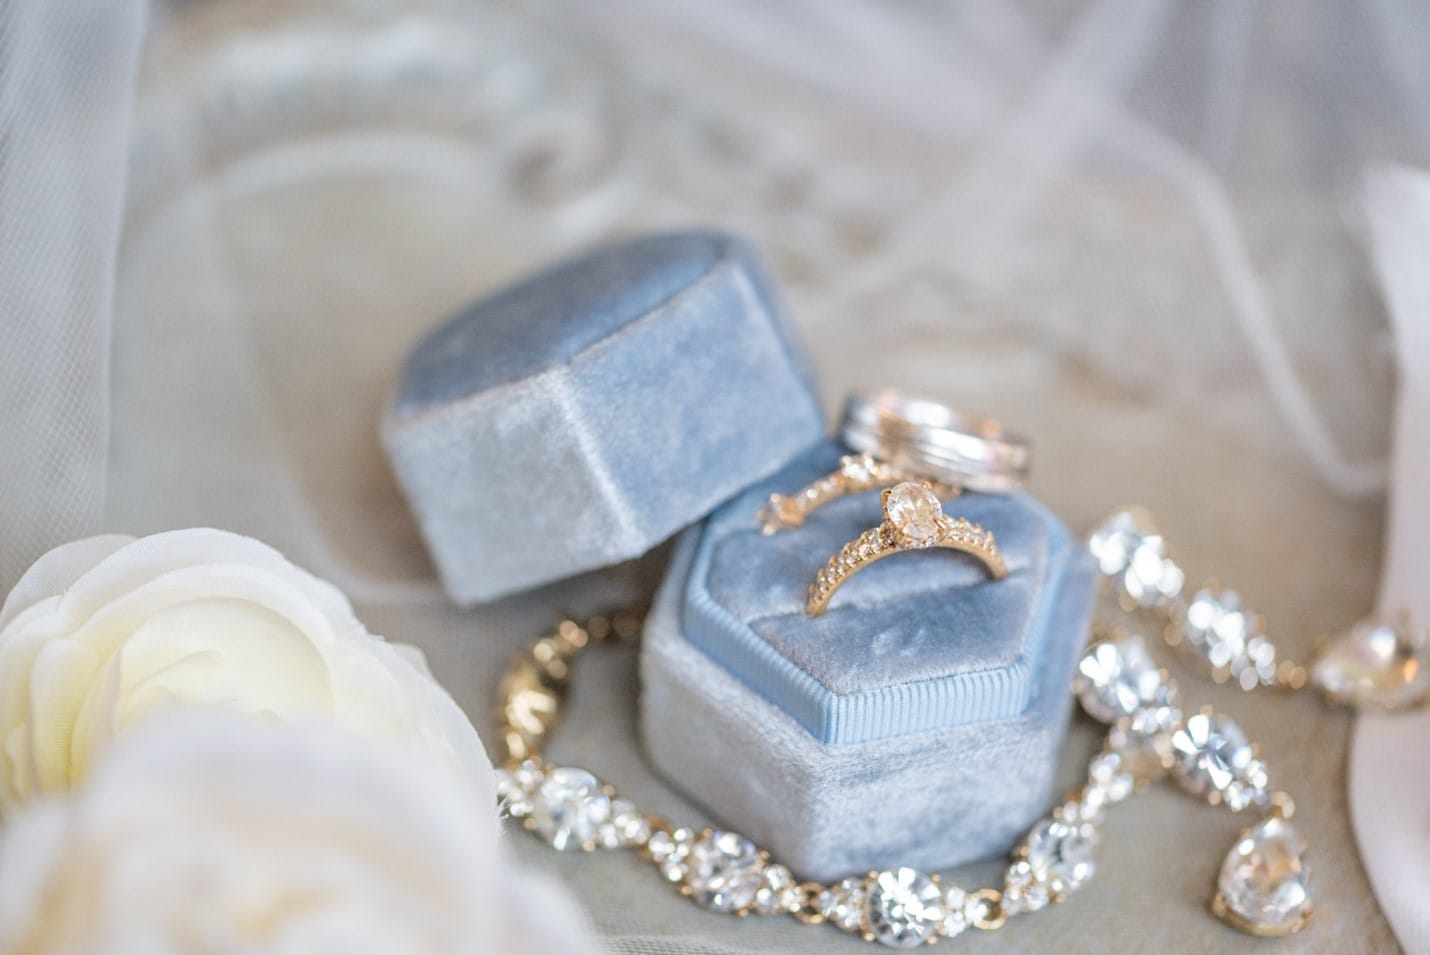 Engagement rings in a blue box circled with a diamond bracelet on white background. Photographed by Caroling MacDonald Photography.